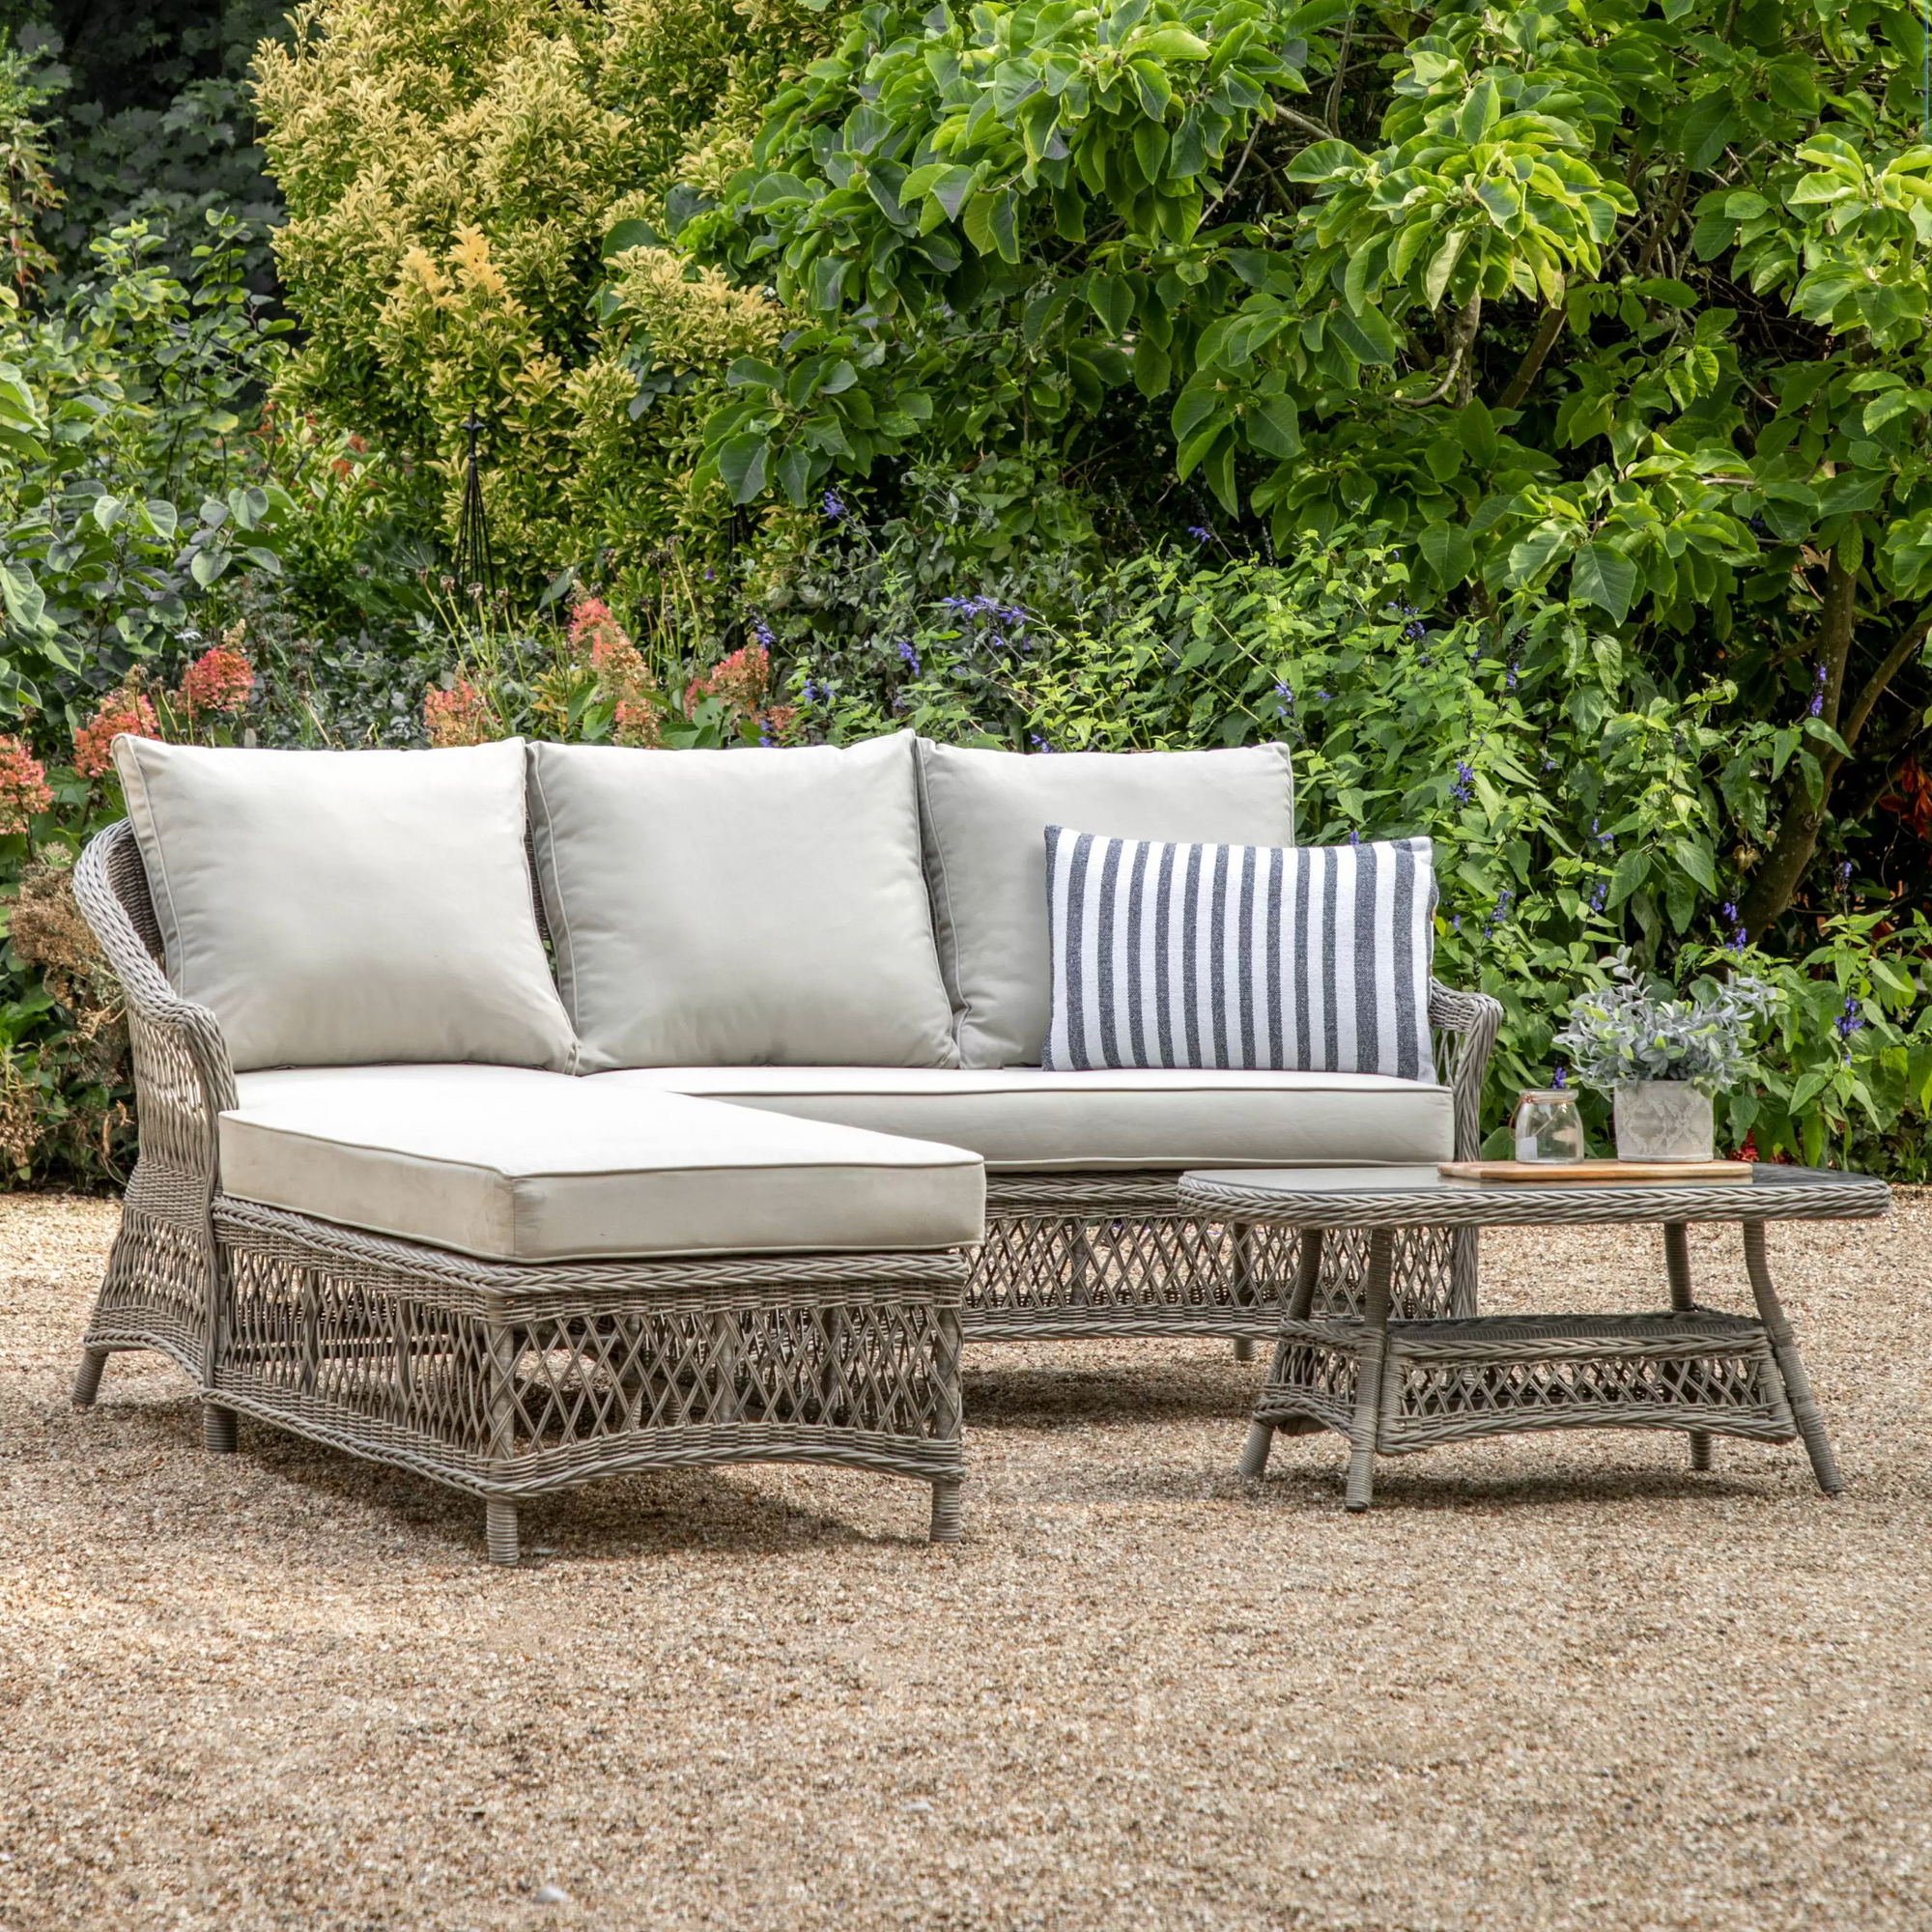 Outdoor Sofa & Chaise Set in garden with flowers